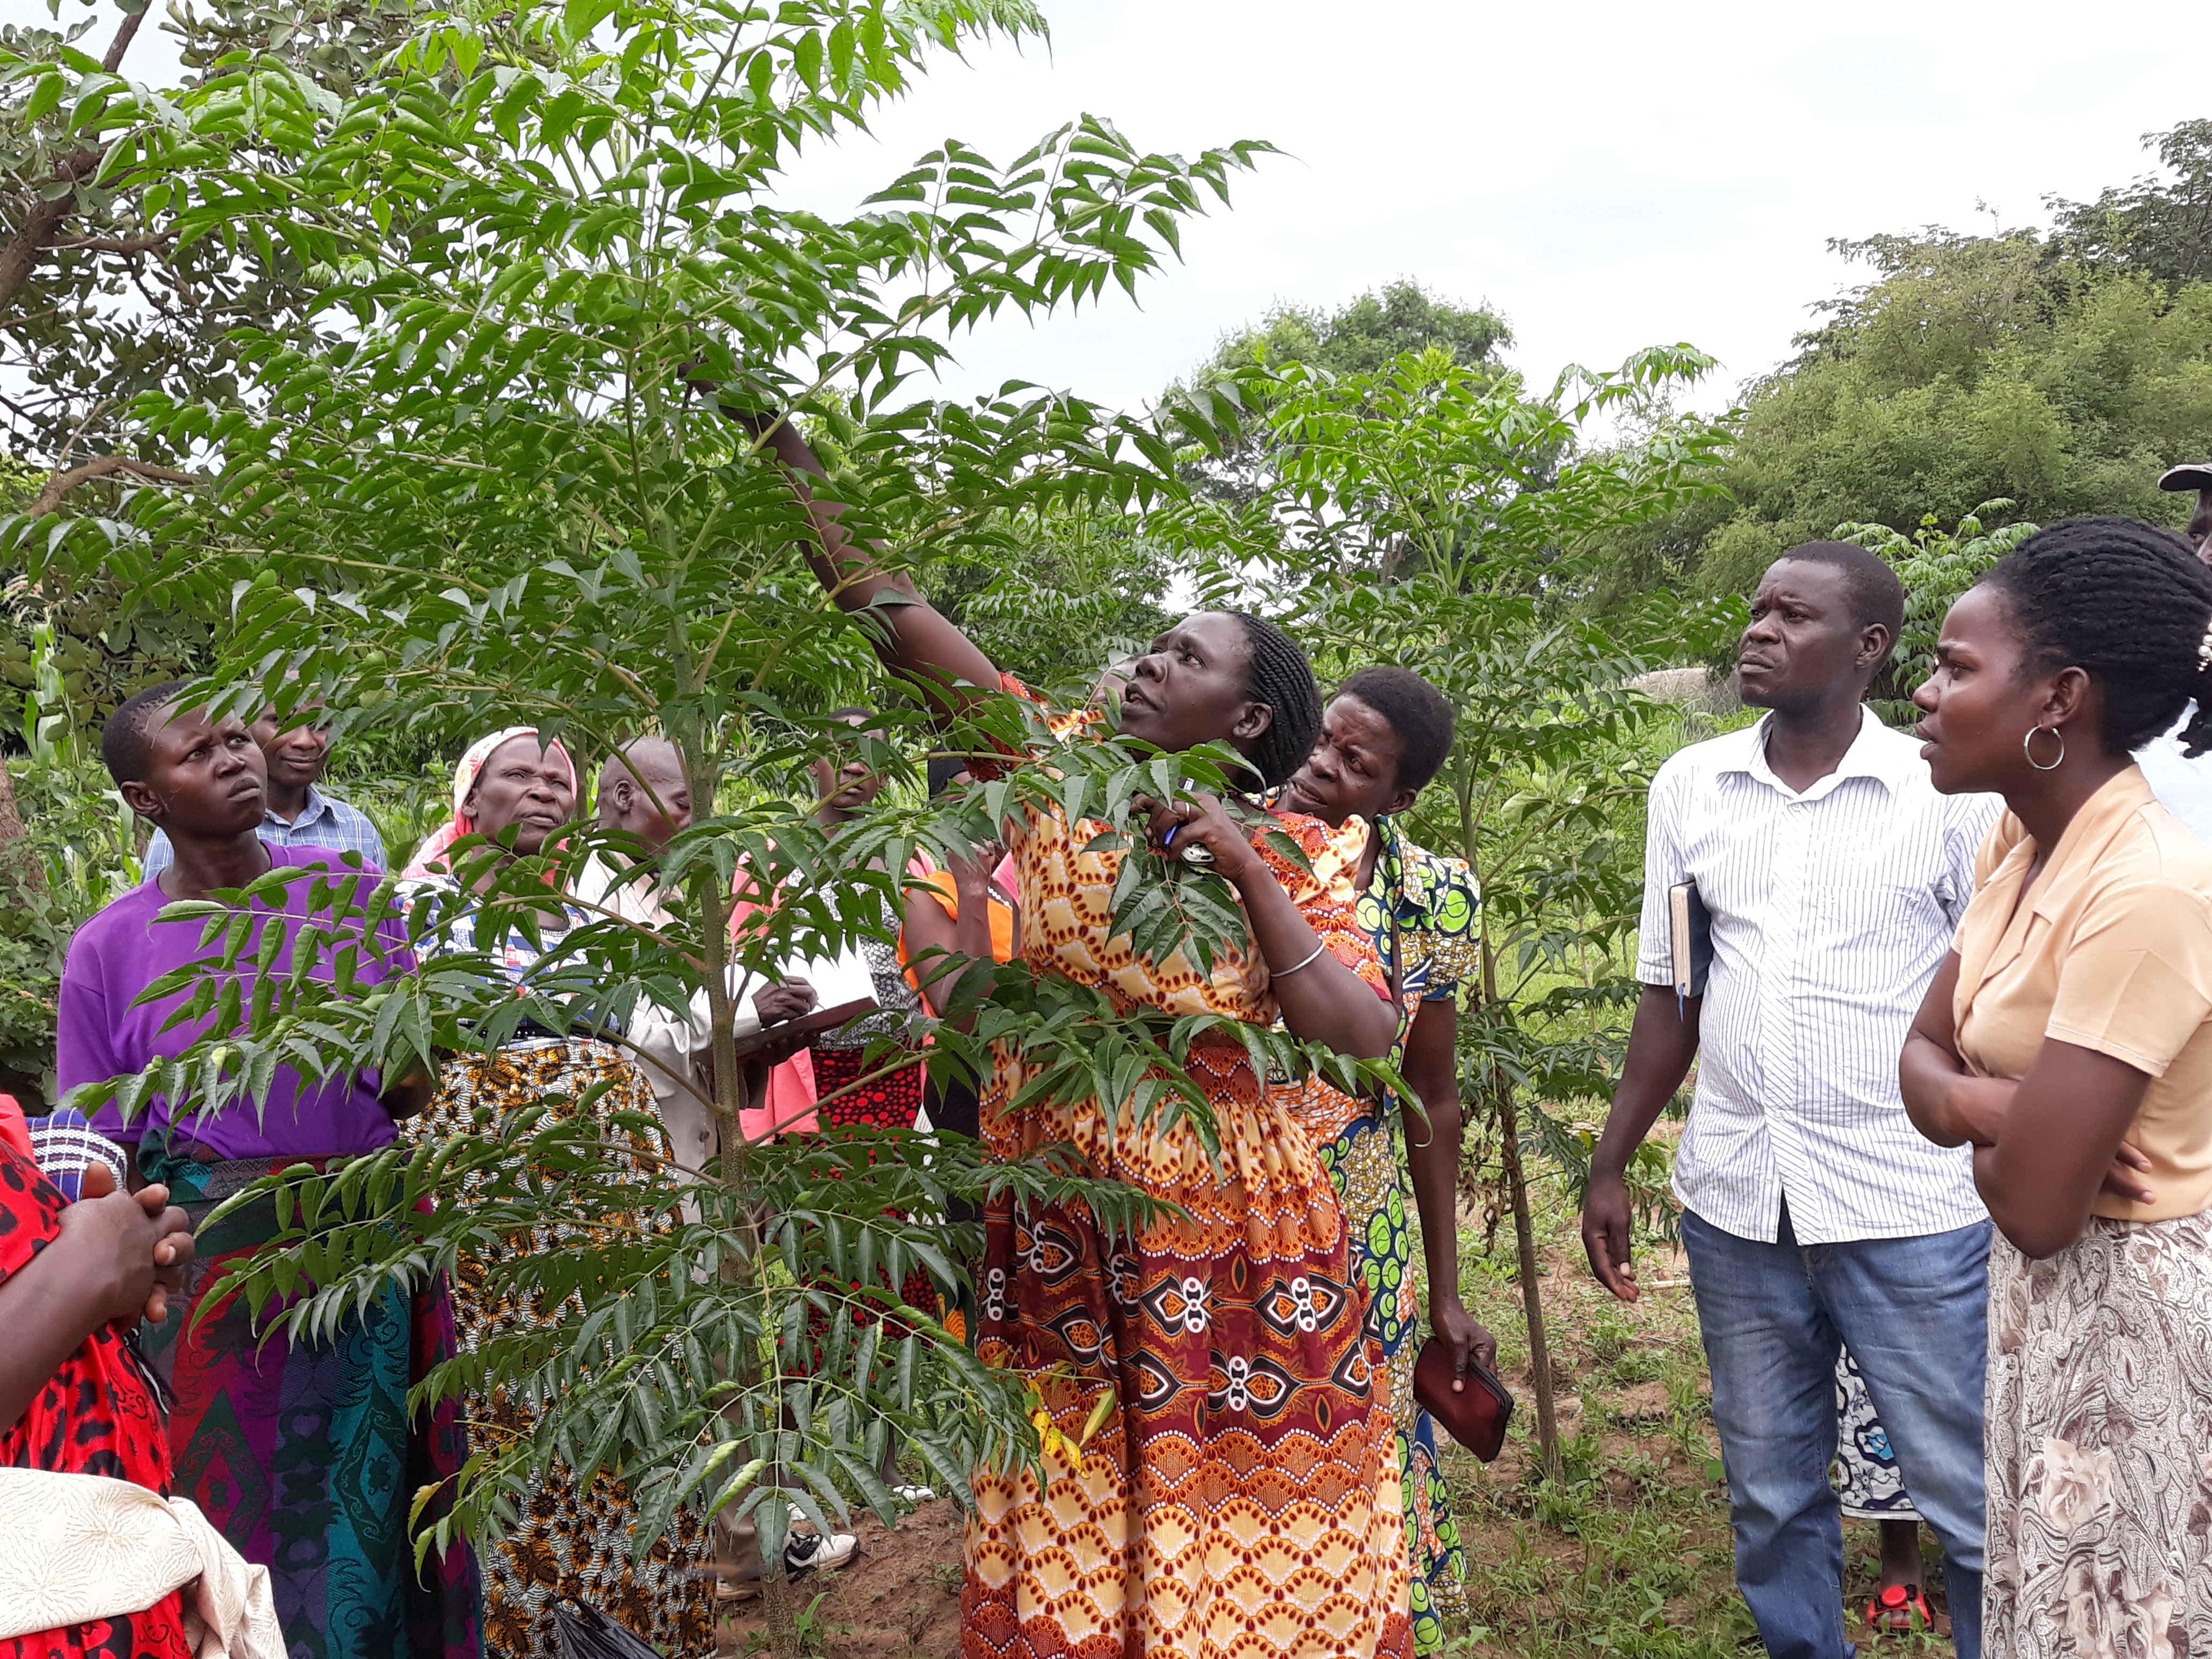 Resilience and Livelihoods: Akumu shows her visitors from Nebbi district how she is farming as business using biopesticides. Organic farming increases production and preserves the environment.